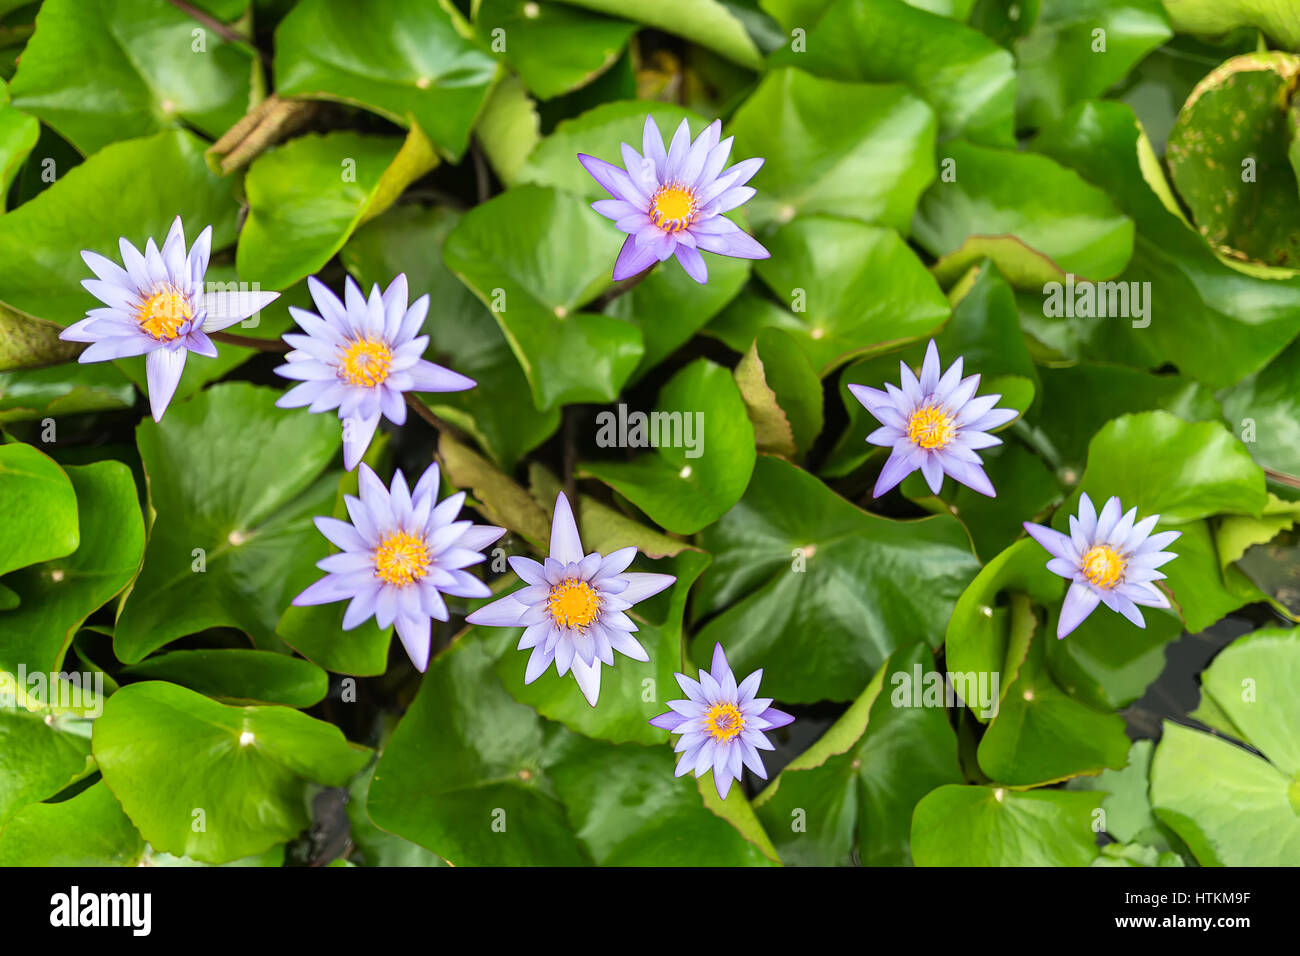 Flowering violet flowers of the water lily on the green leaves background in the Cloud Forest in Singapore. Shoot from above. Closeup photo. Horizonta Stock Photo